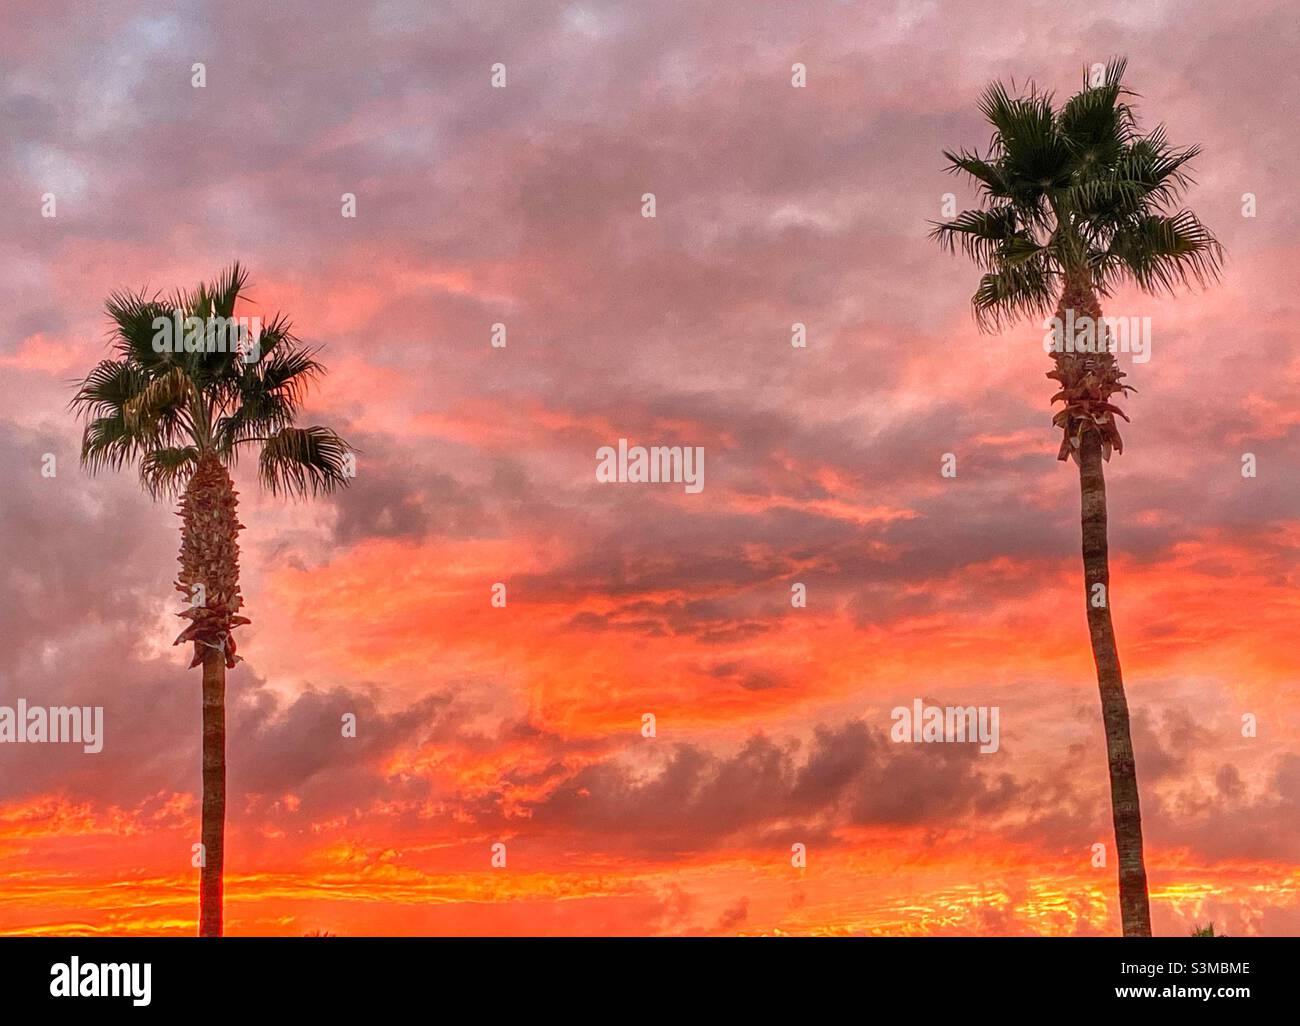 Sunset in Arizona, with palm trees and beautiful warm colors. Stock Photo